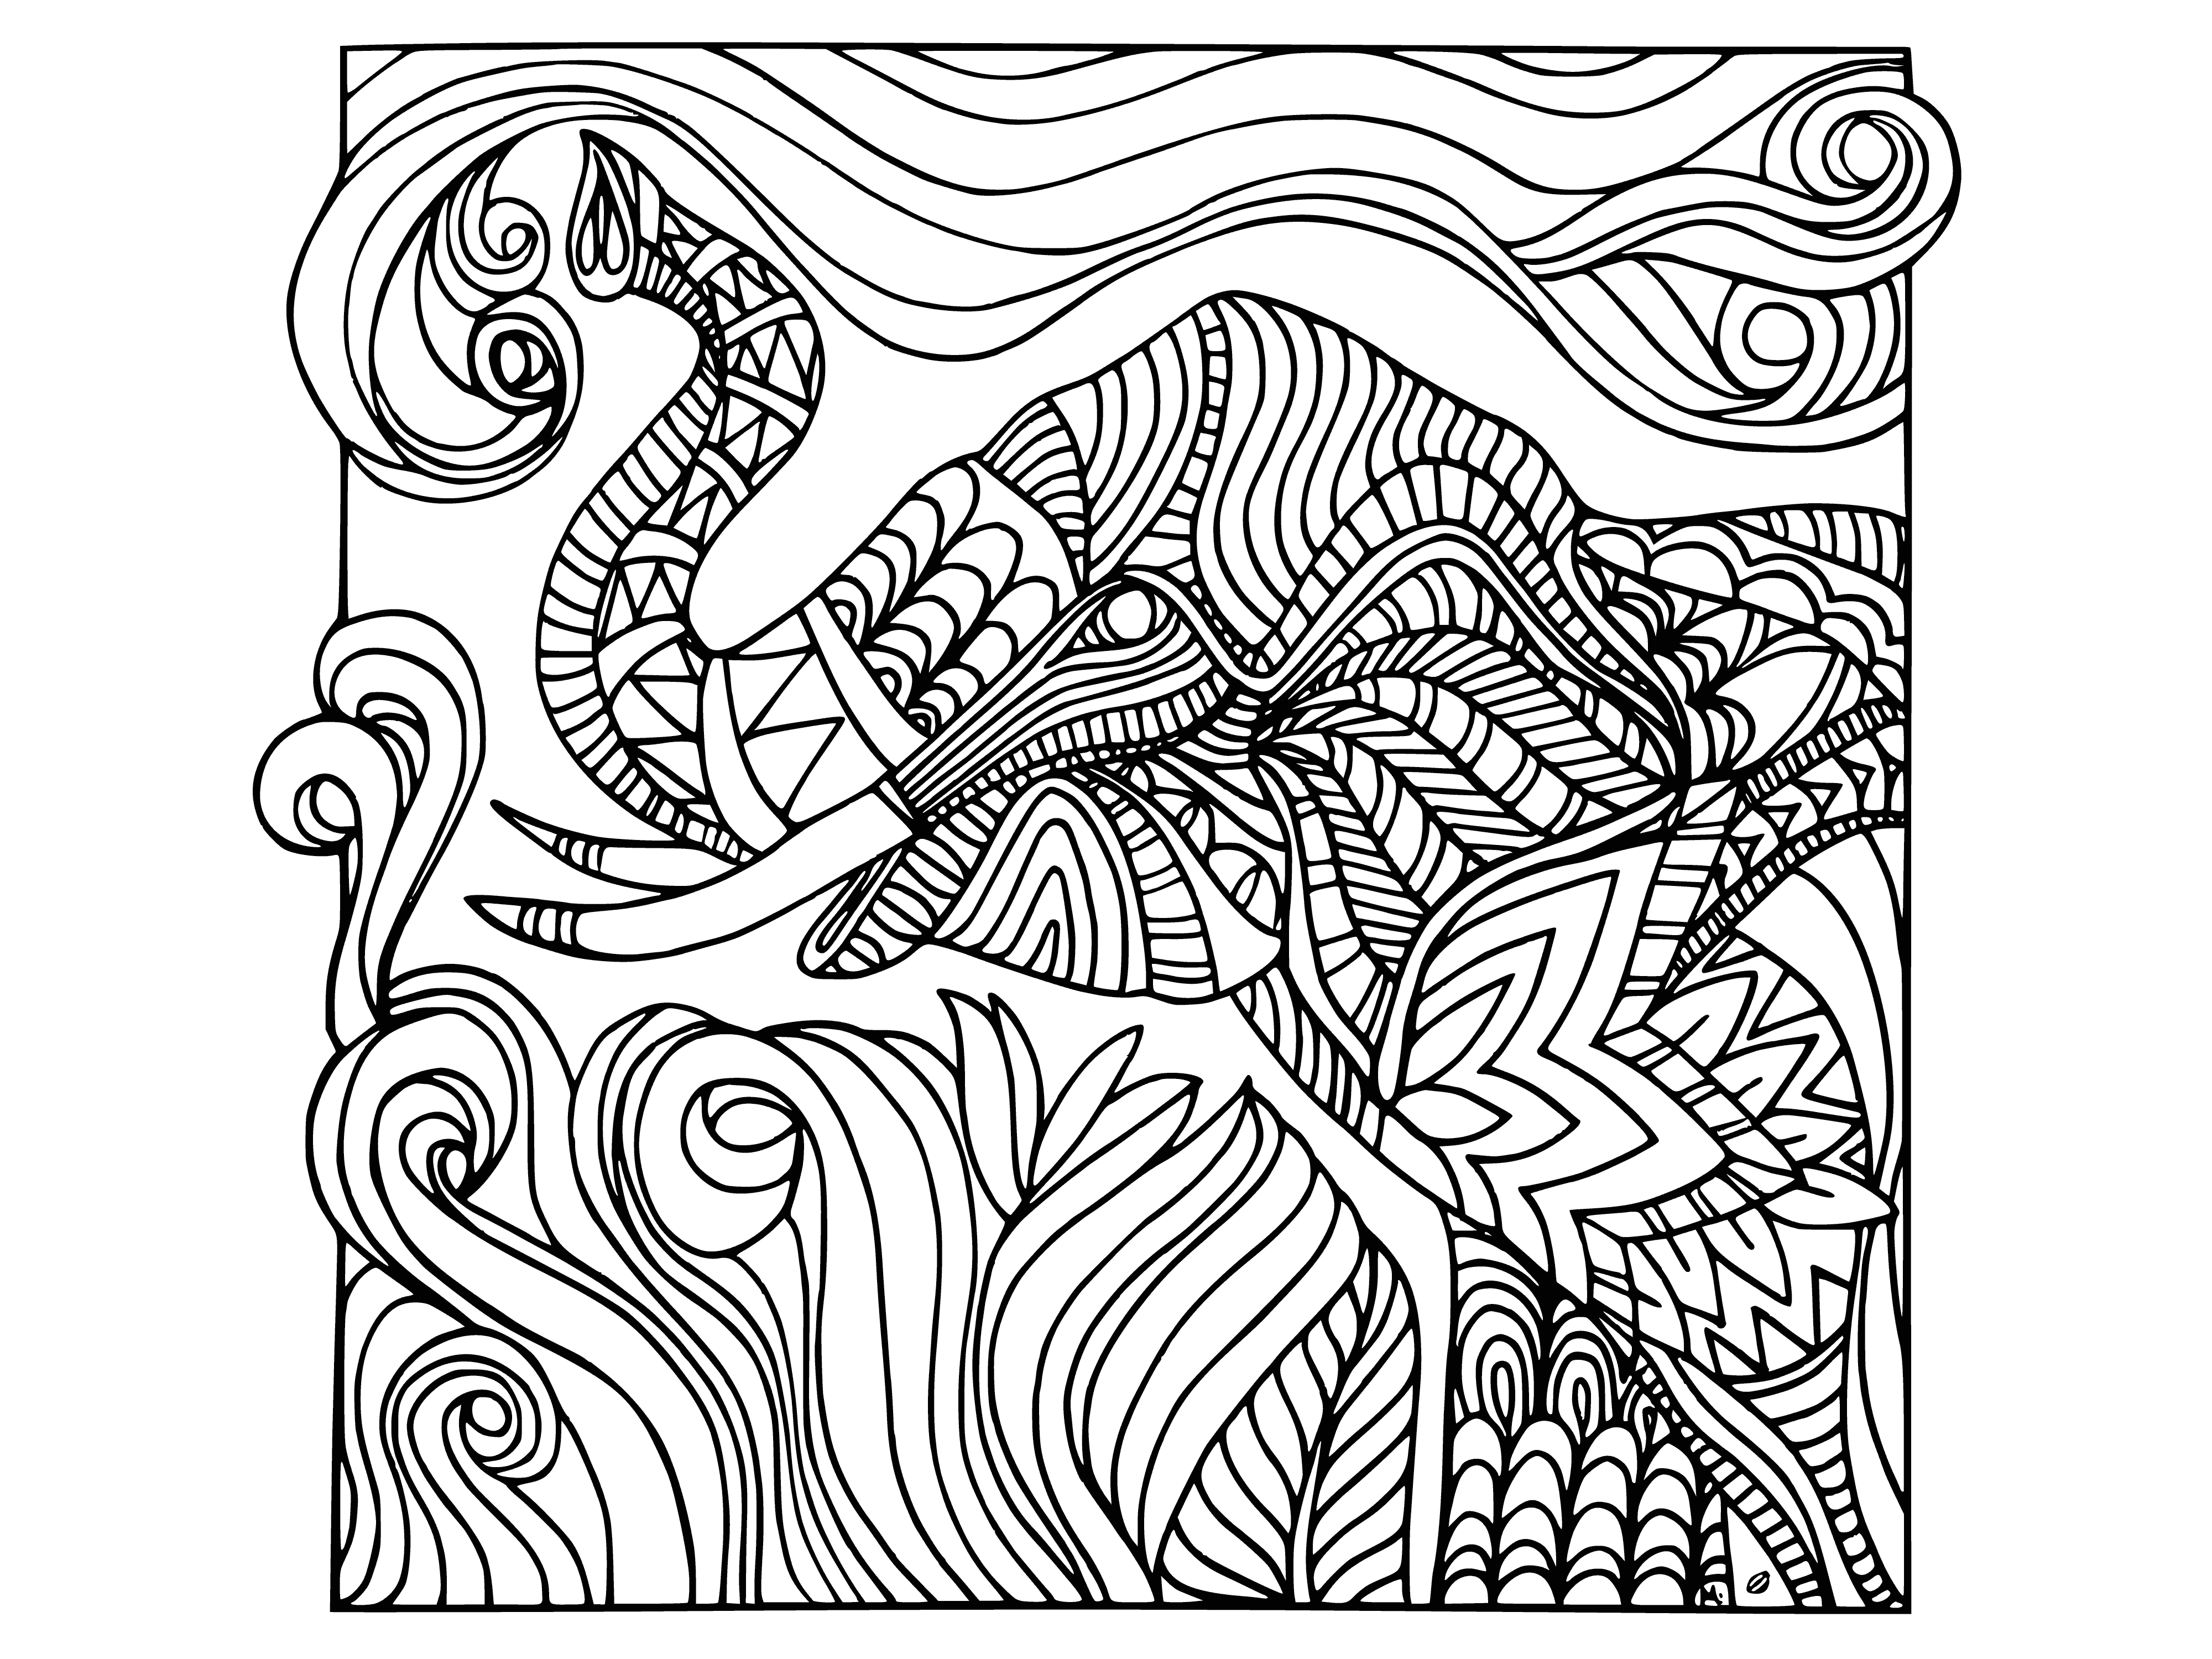 coloring page: Elephant: Large, gray mammal w/ trunk & big ears; gentle creature. #elephant